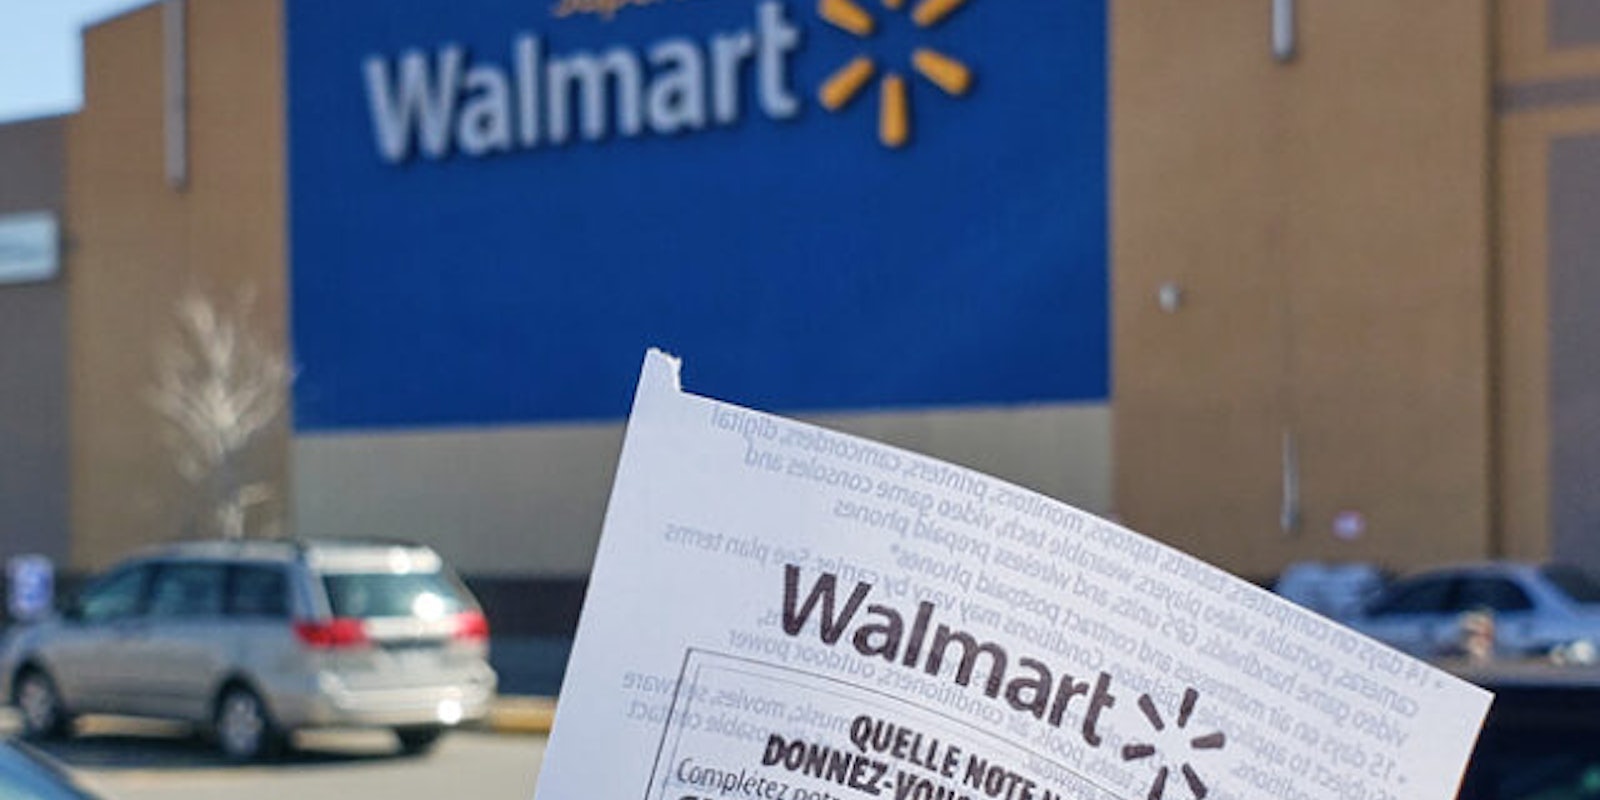 Walmart customer holding receipt with highlighted purchase (l) Walmart customer holding receipt in parking lot in front of Walmart building (c) Walmart customer with full cart (r)